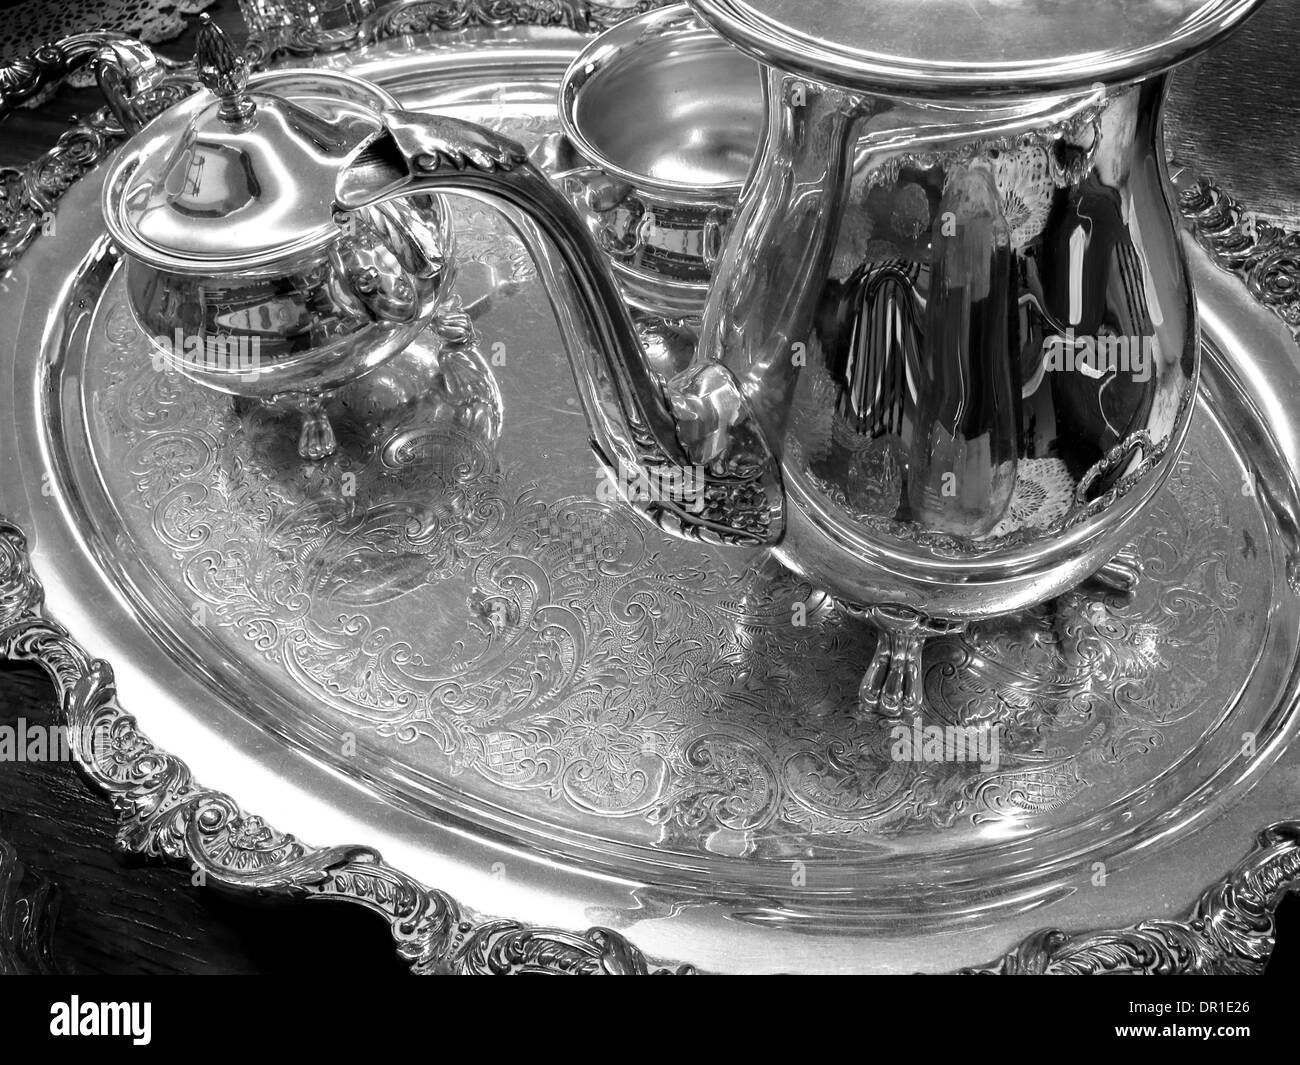 Decorative elegant silver service tray with engravings Stock Photo